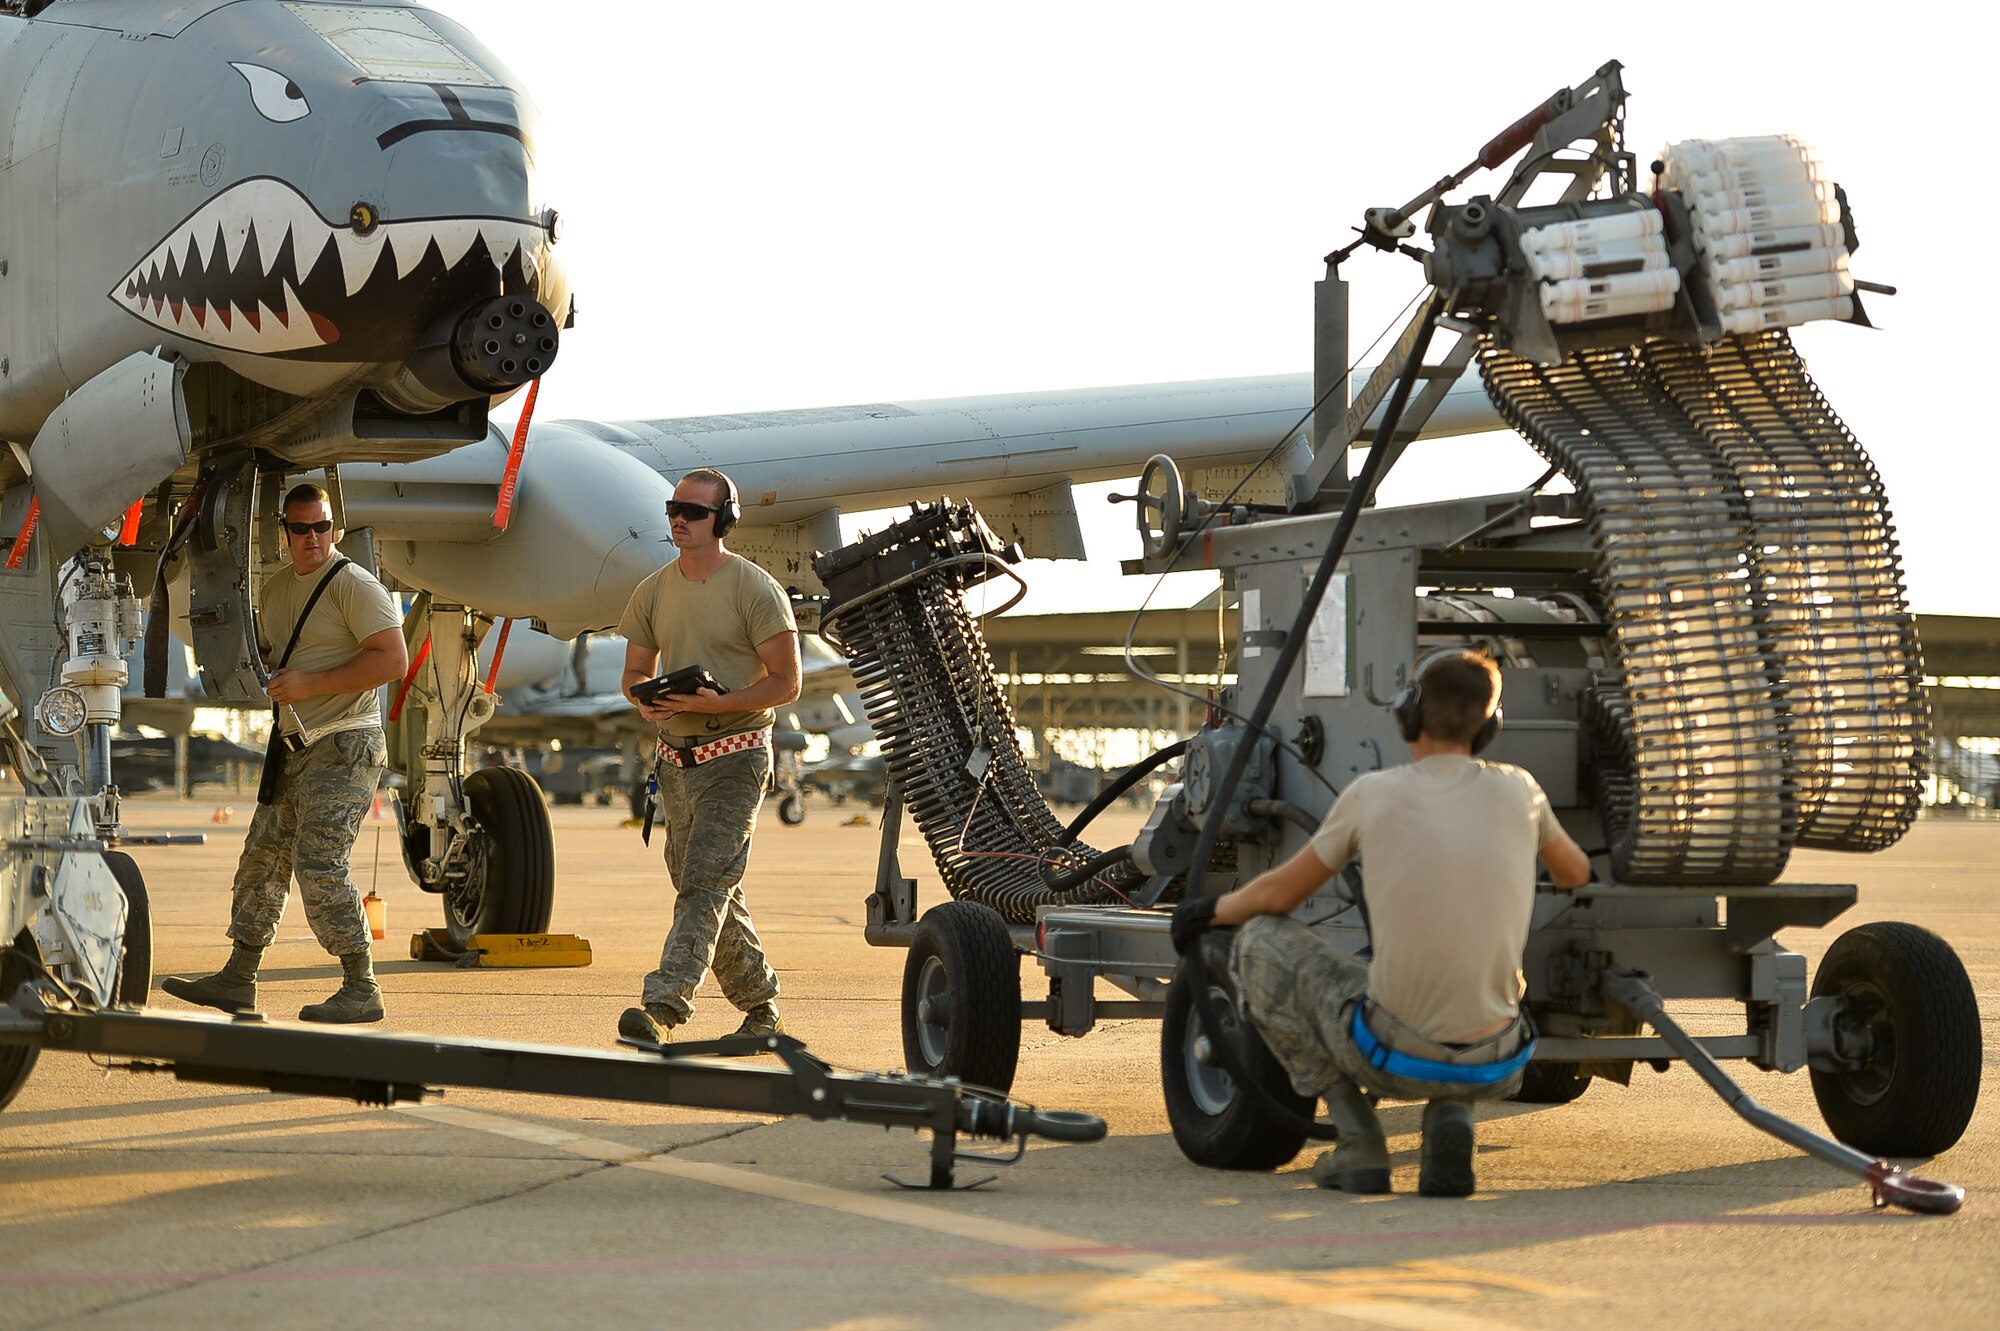 Airmen assigned to the 23rd Aircraft Maintenance Squadron, Moody Air Force Base, Ga., prepare to offload 30 mm shells from an A-10 Thunderbolt II aircraft Aug. 3 at Hill AFB. Earlier in the day, the aircraft flew during an exercise known as Combat Hammer. (U.S. Air Force photo by R. Nial Bradshaw)